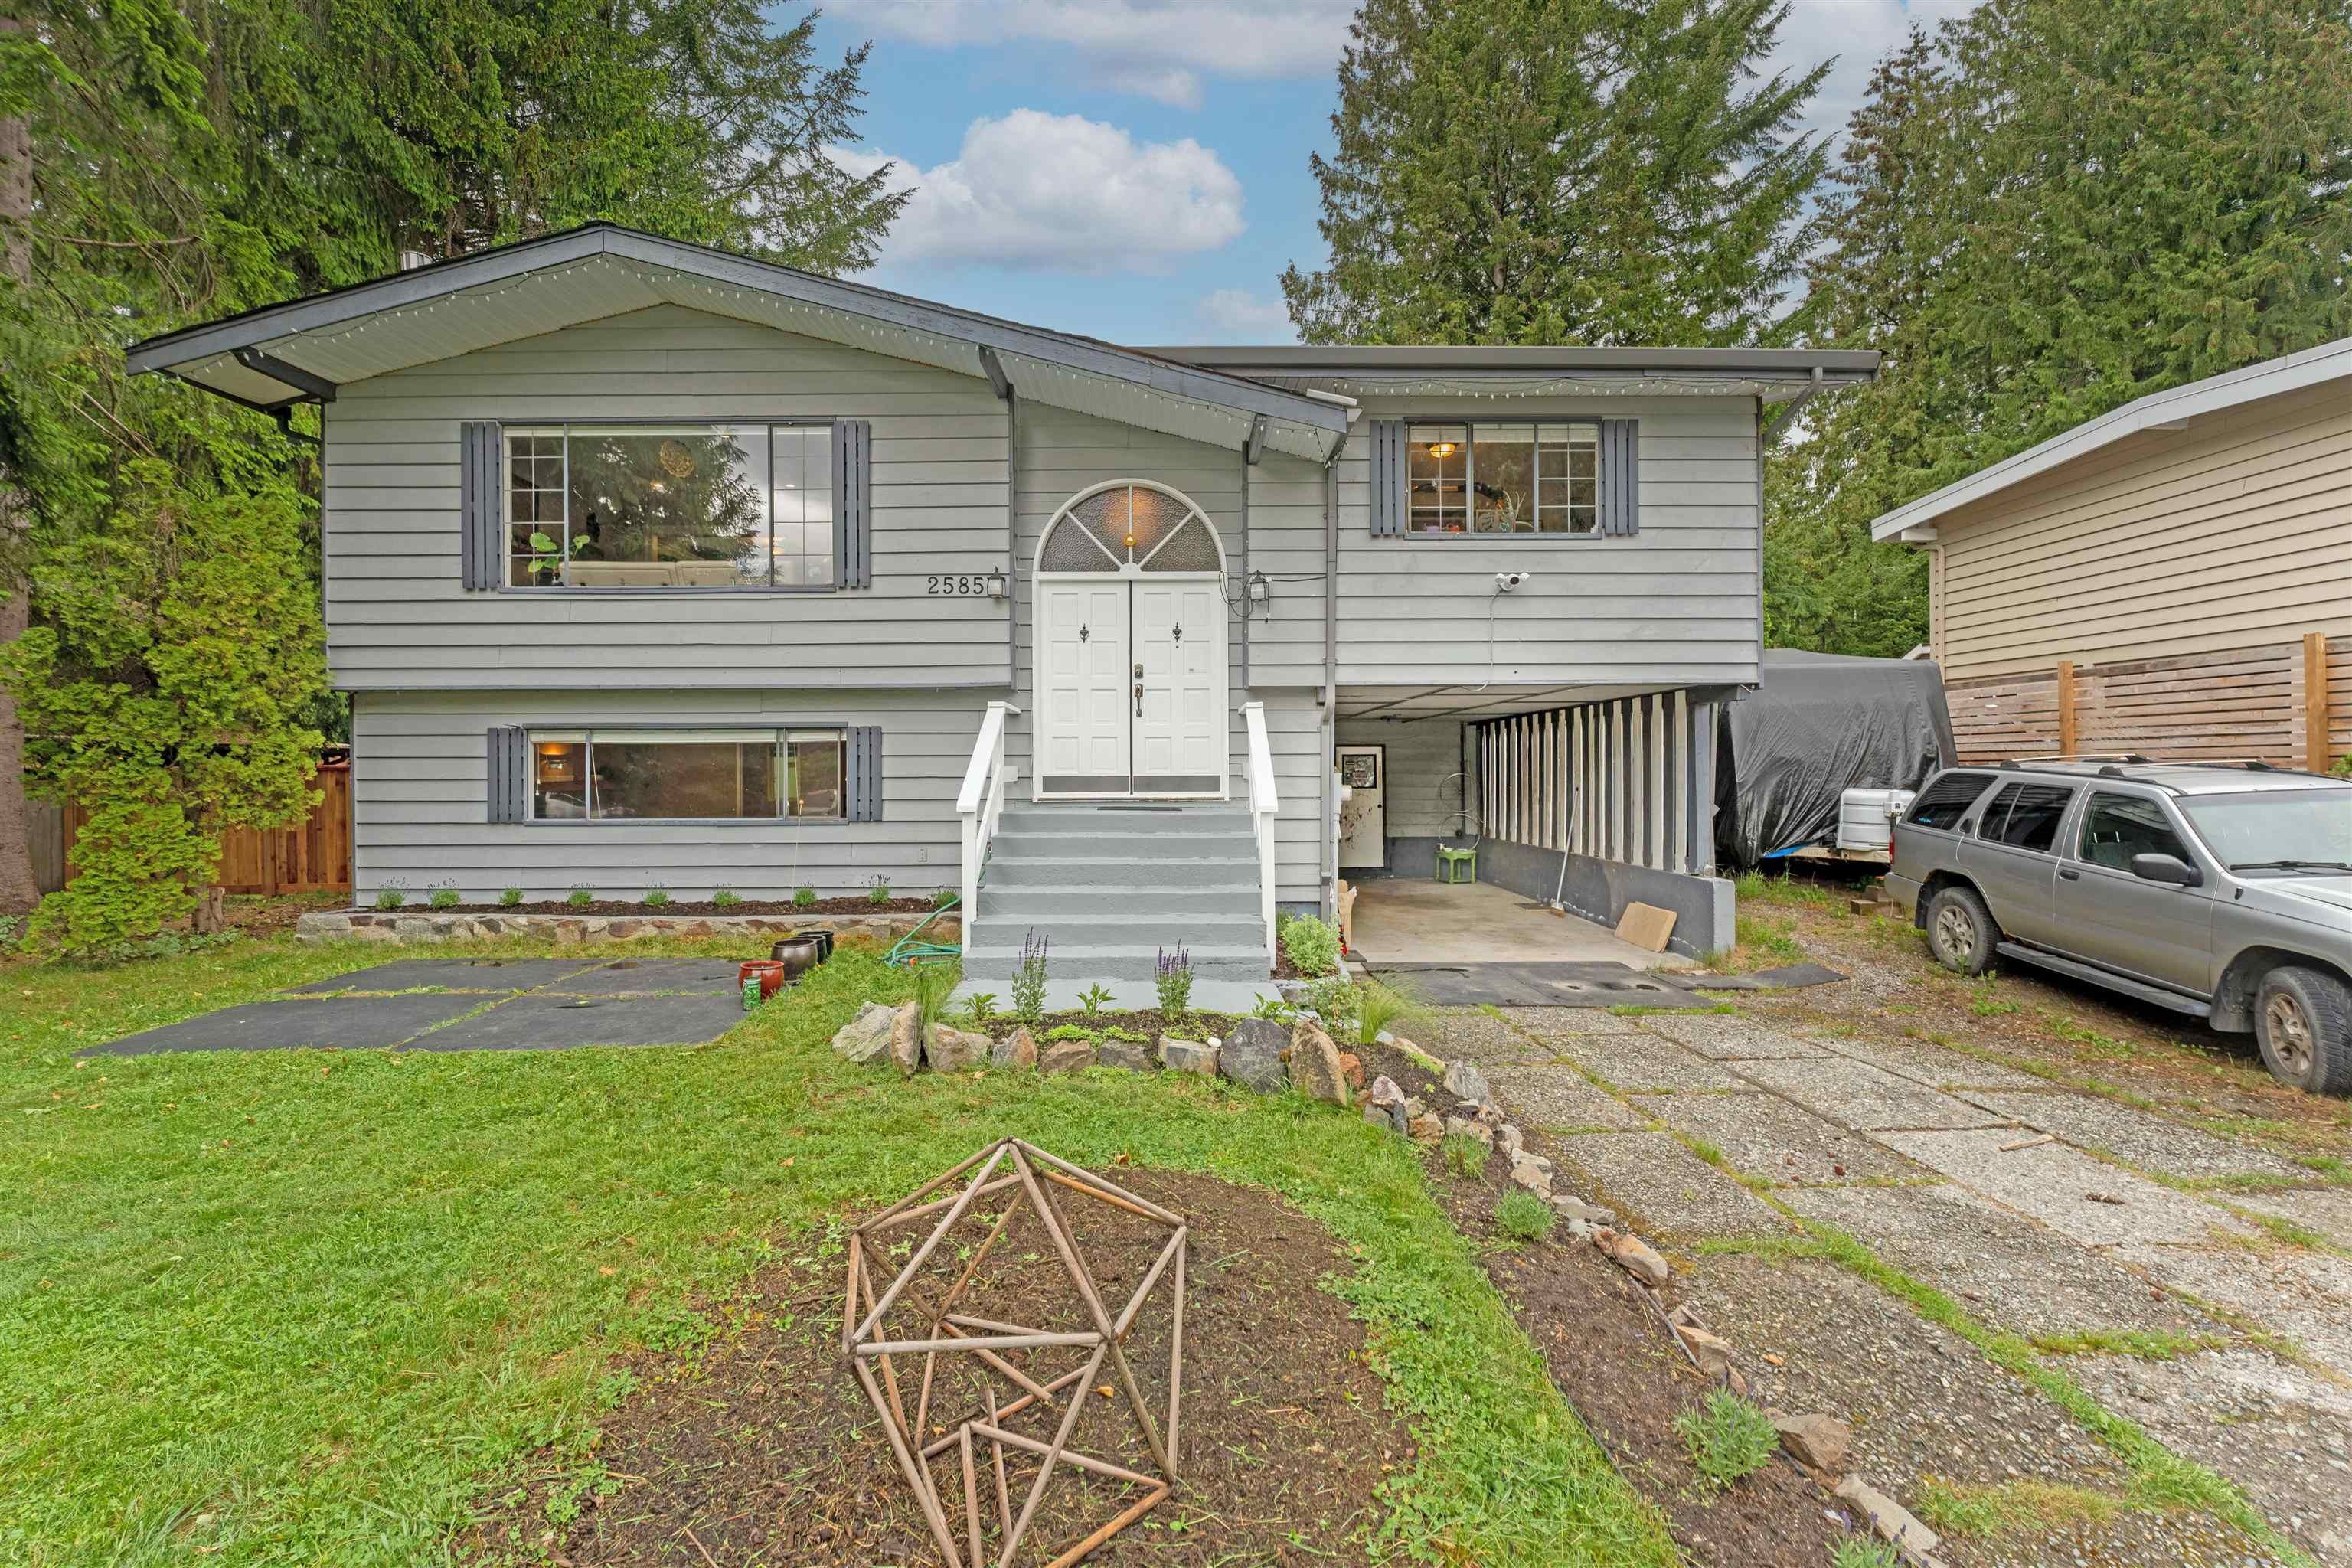 I have sold a property at 2585 PORTREE WAY in Squamish
